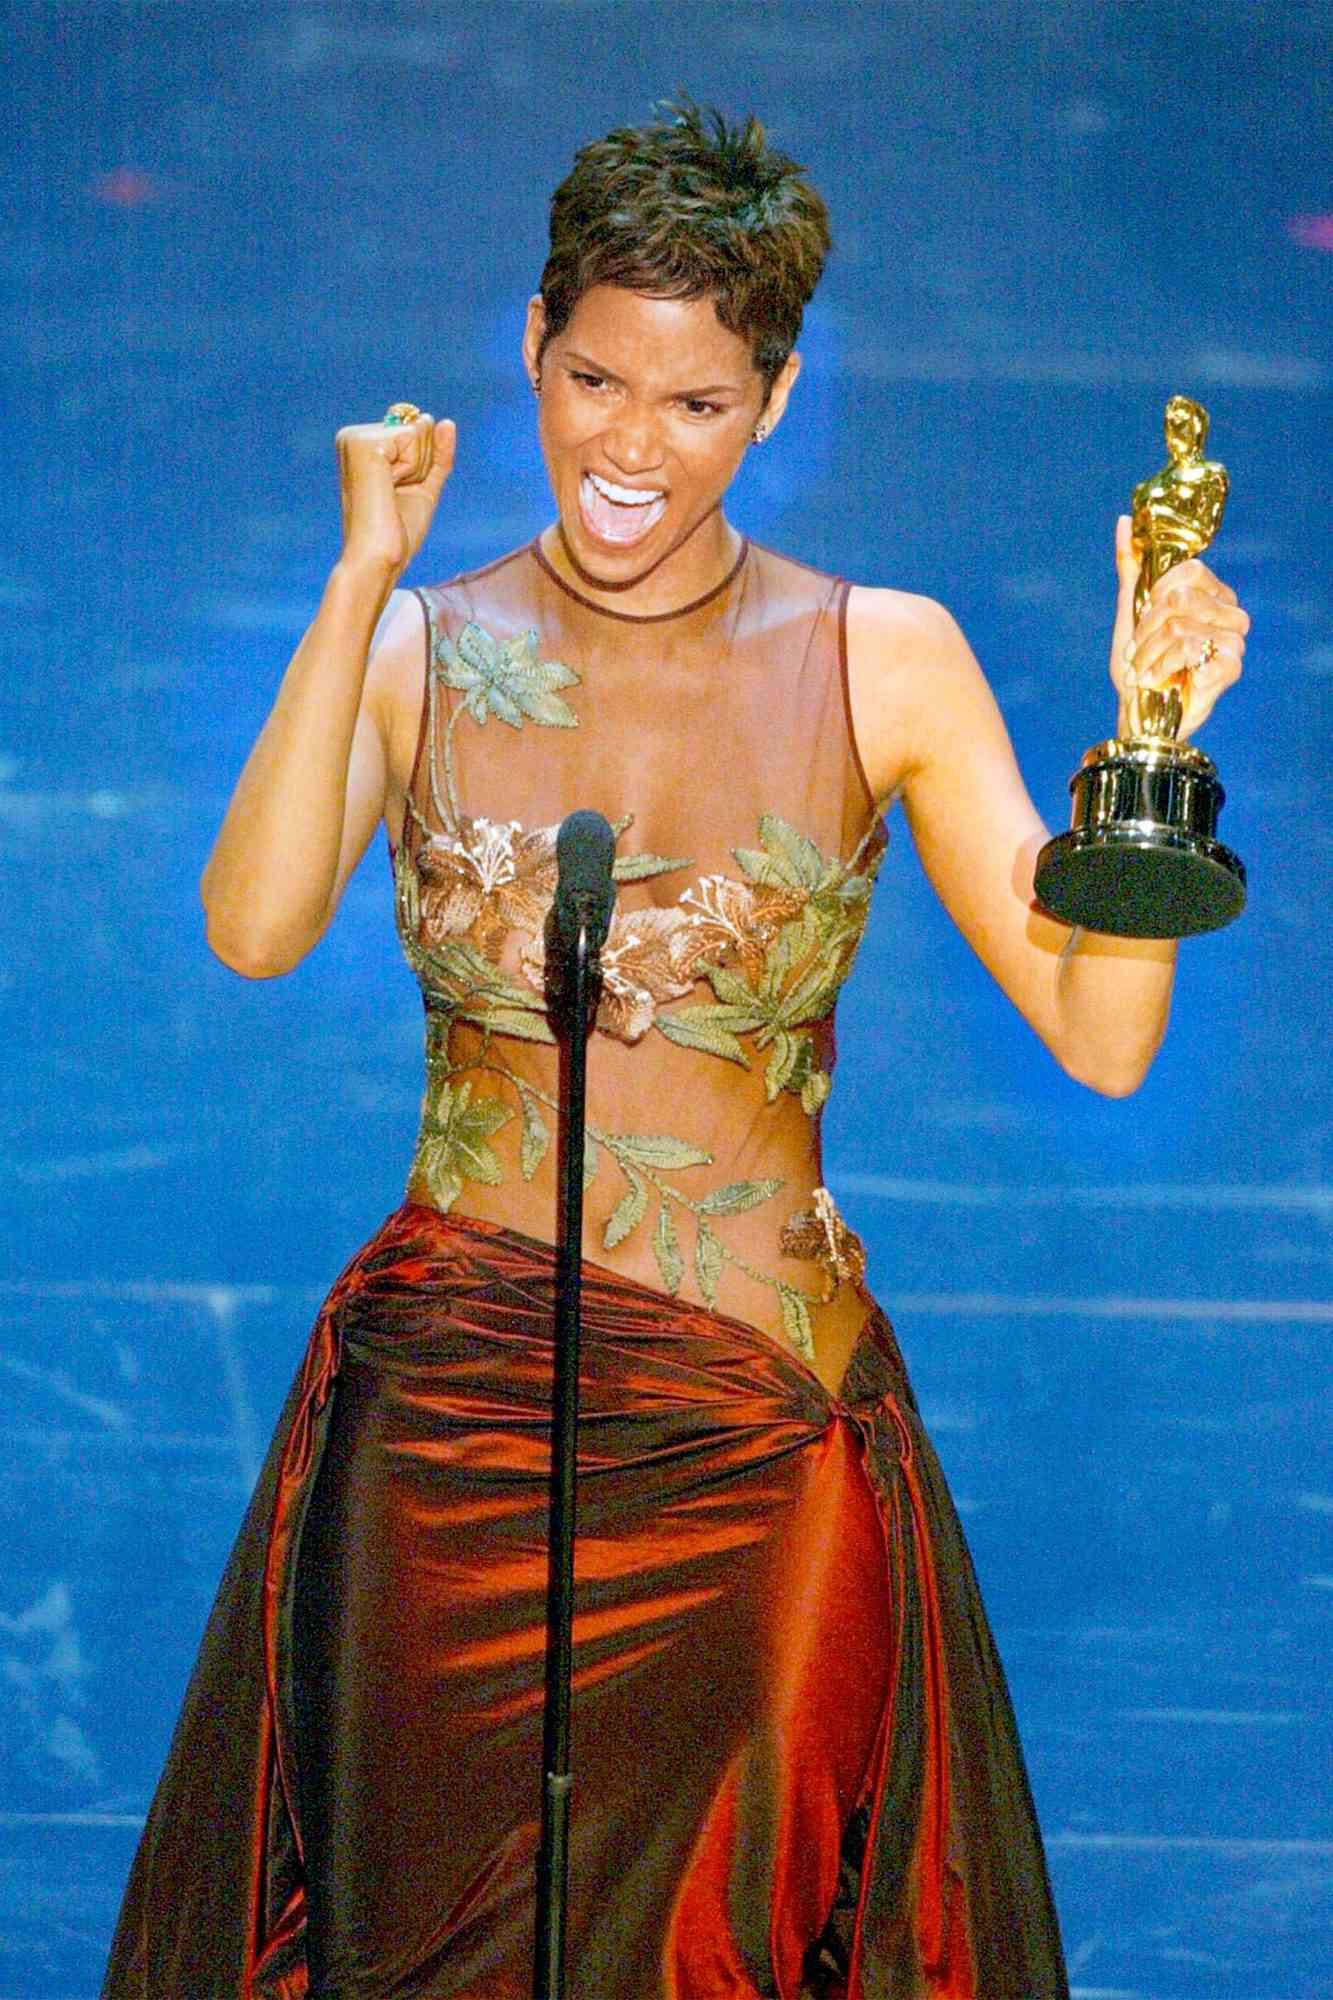 US actress Halle Berry accepts her Oscar for best